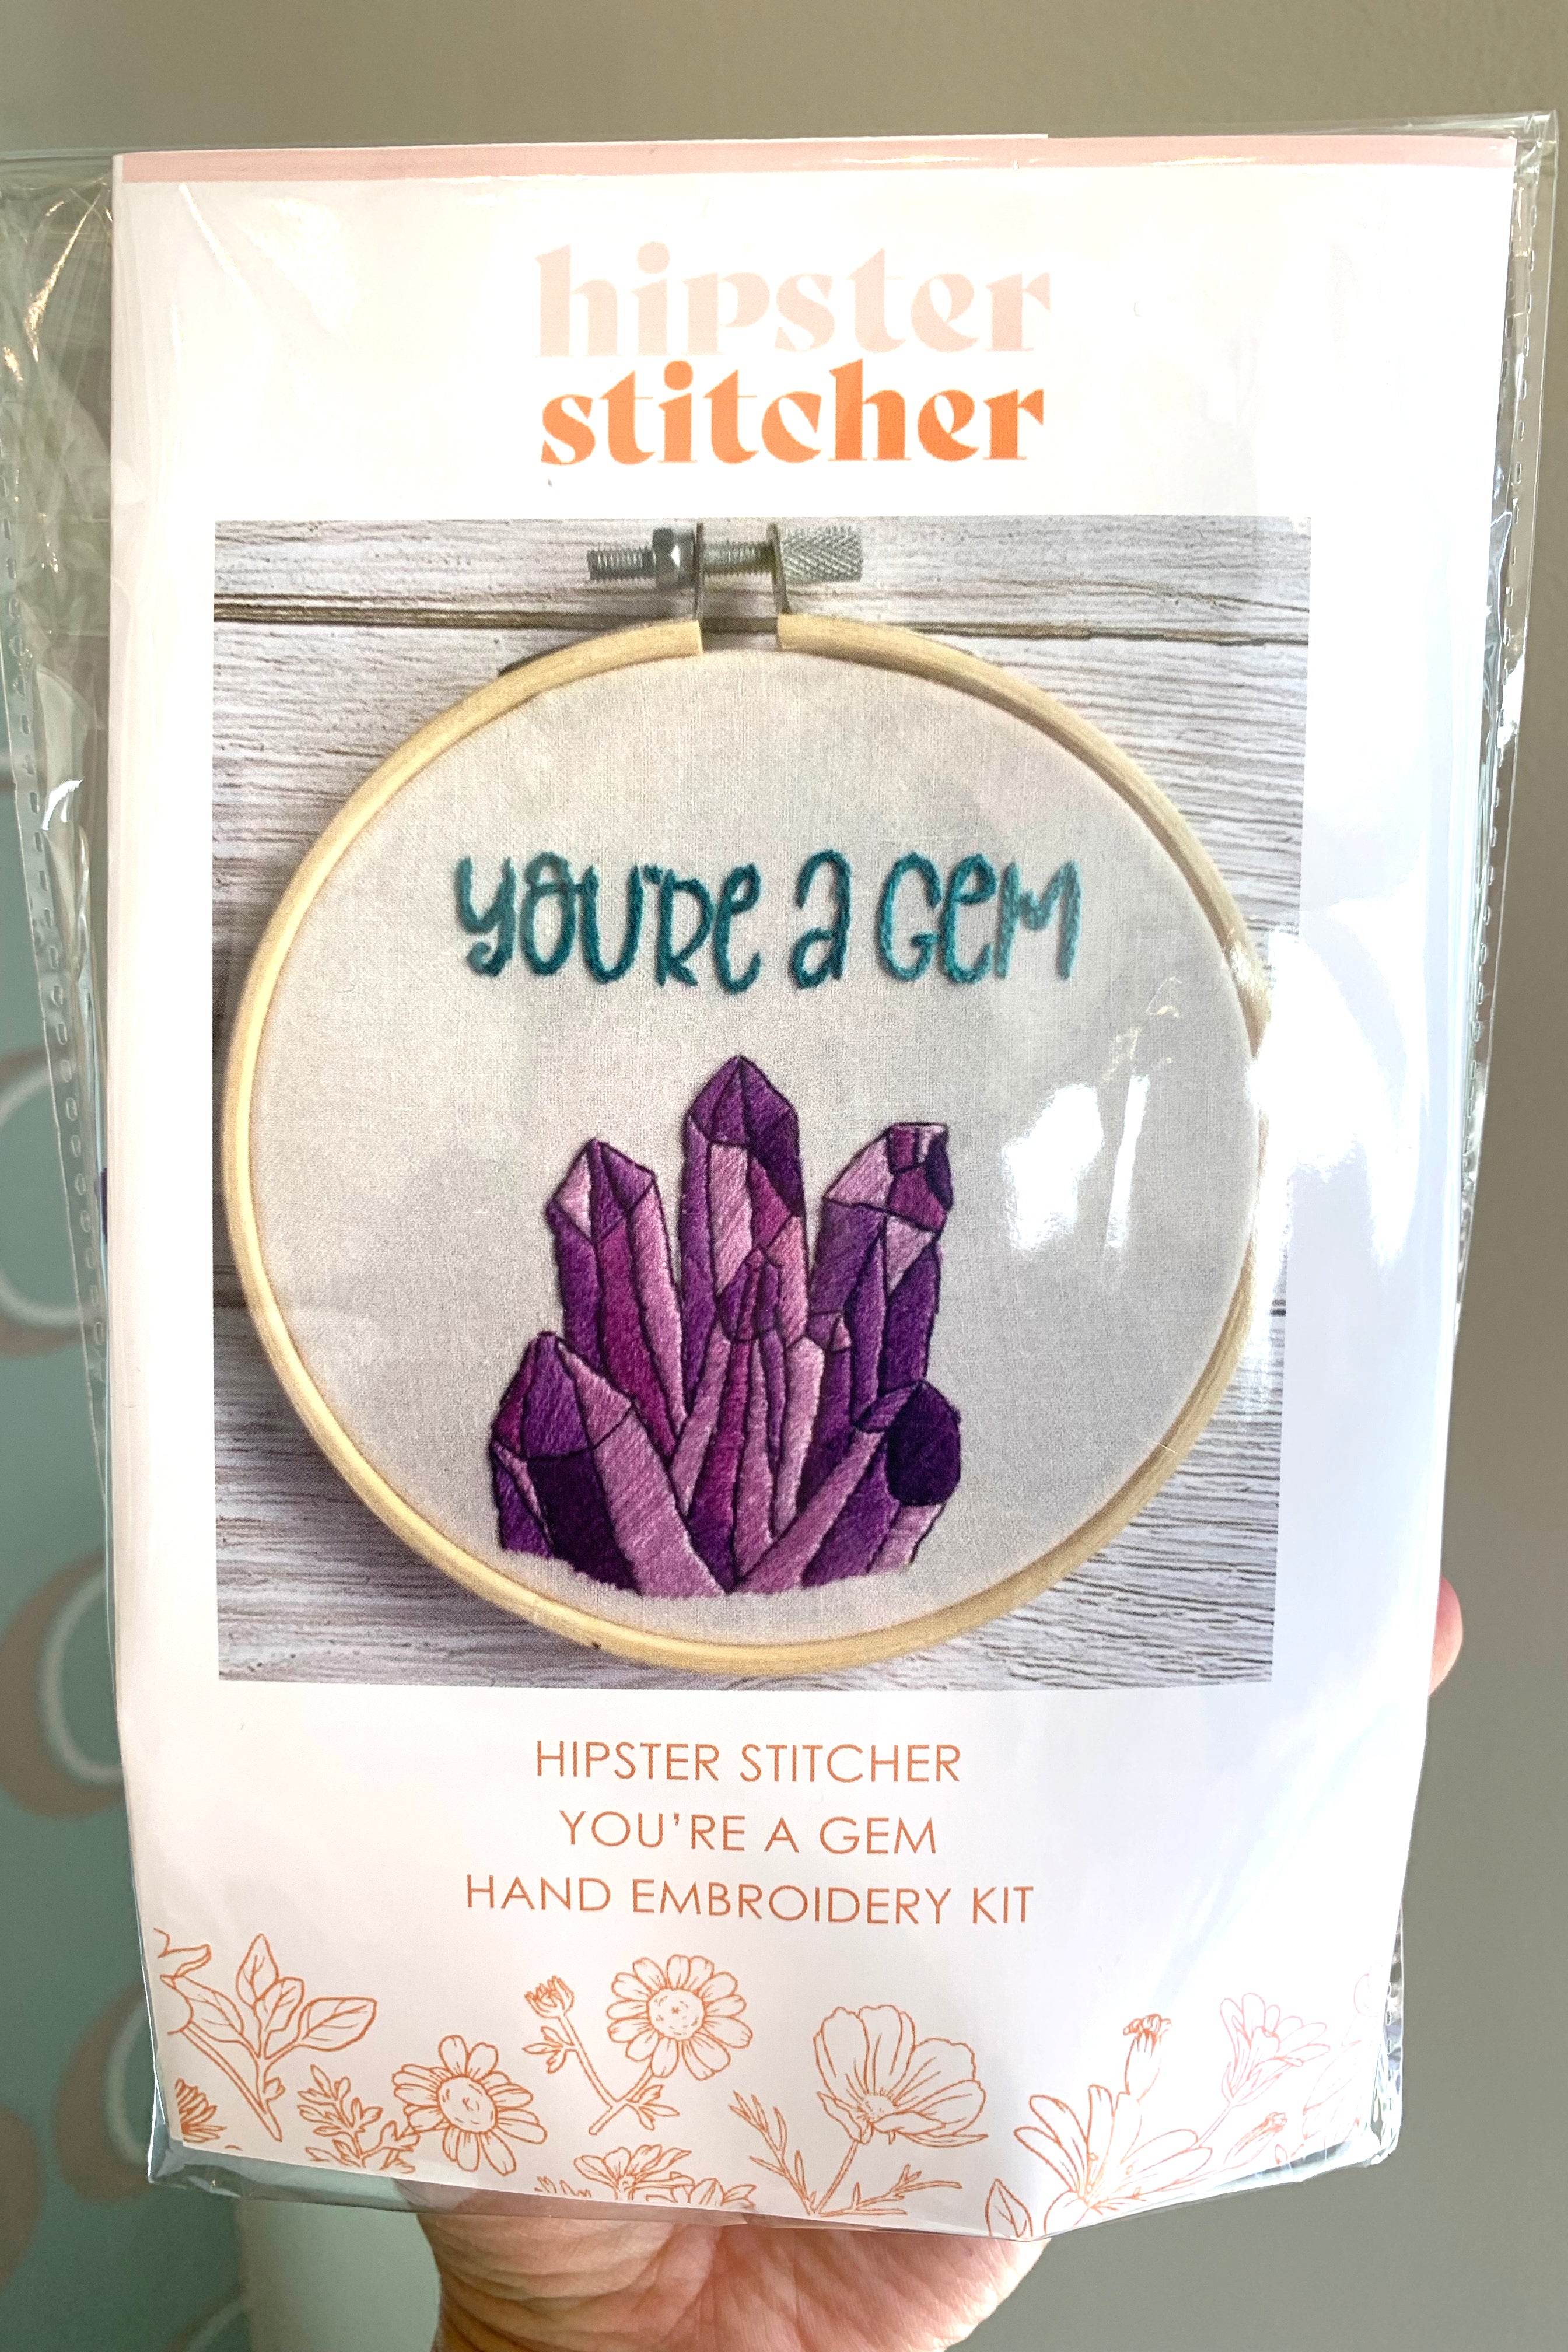 You're a Gem Hand Embroidery Kit